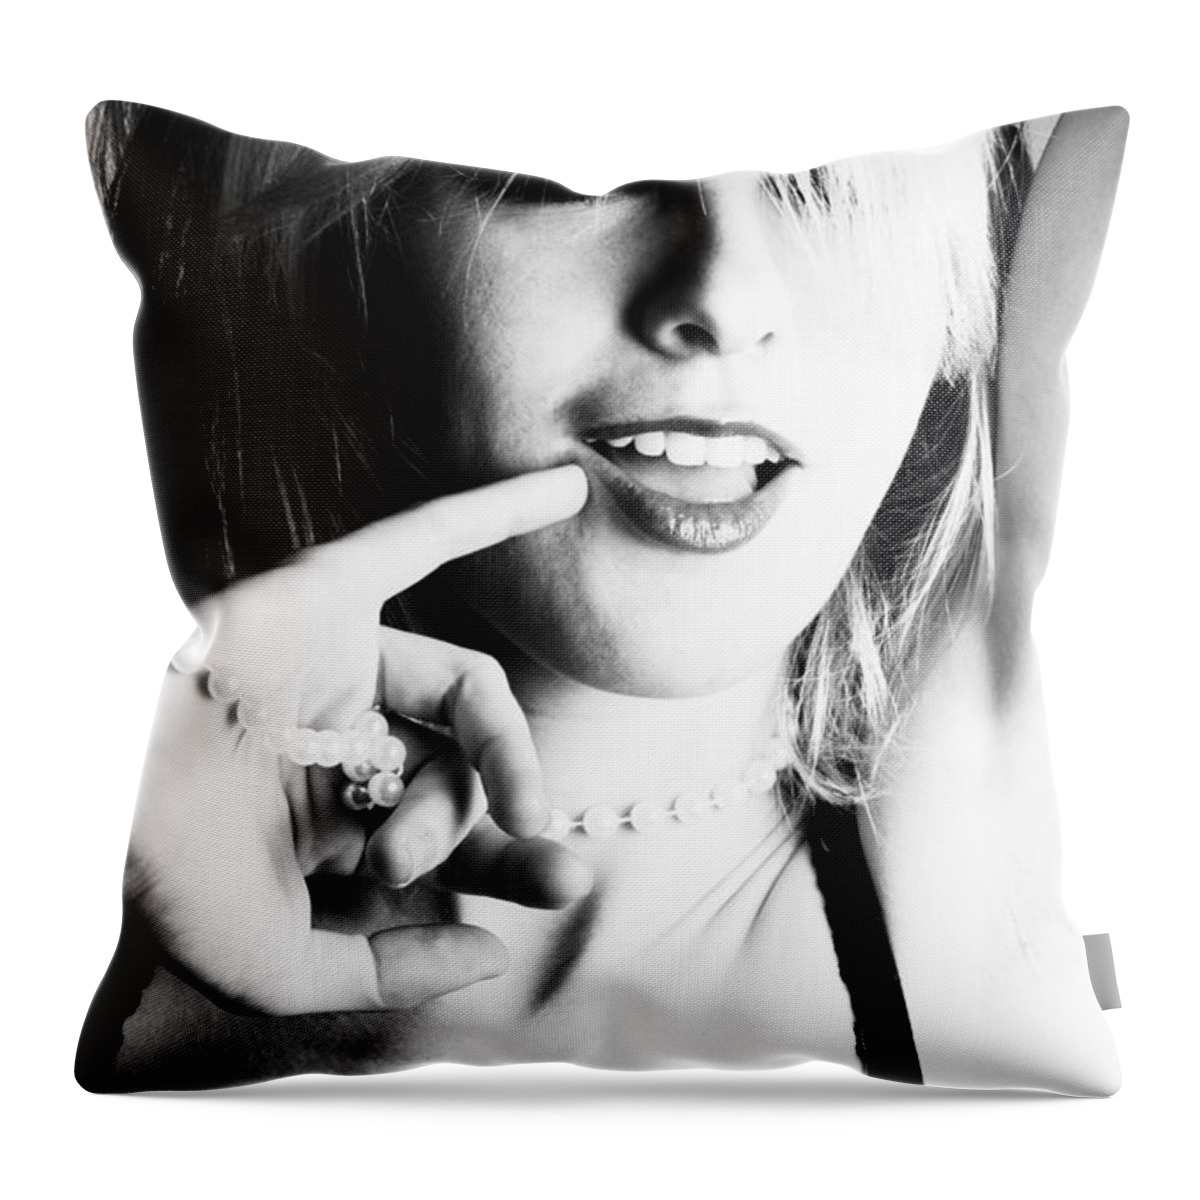 Artistic Throw Pillow featuring the photograph Loads of Fun by Robert WK Clark